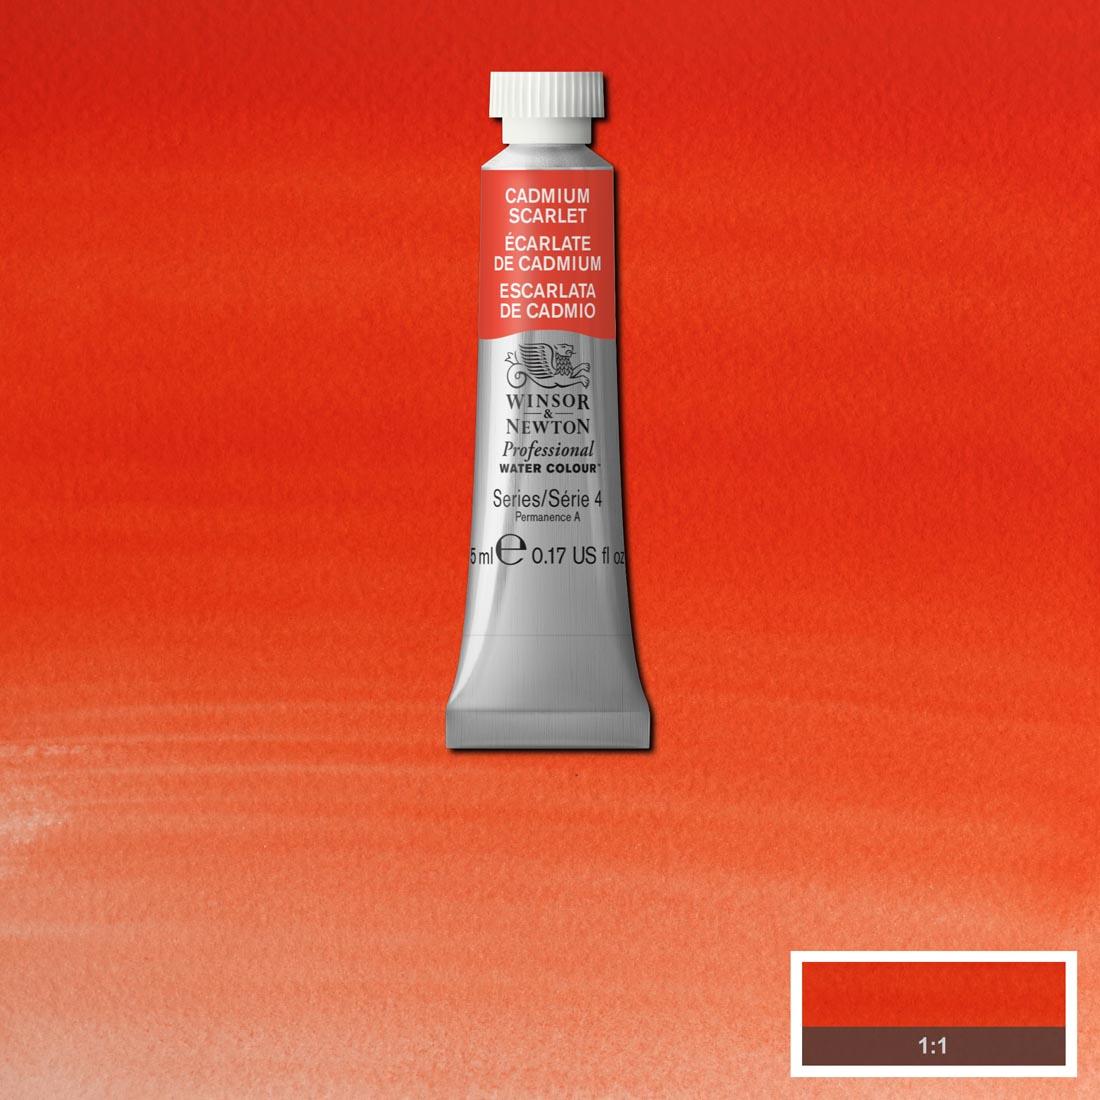 Tube of Cadmium Scarlet Winsor & Newton Professional Water Colour with a paint swatch for the background